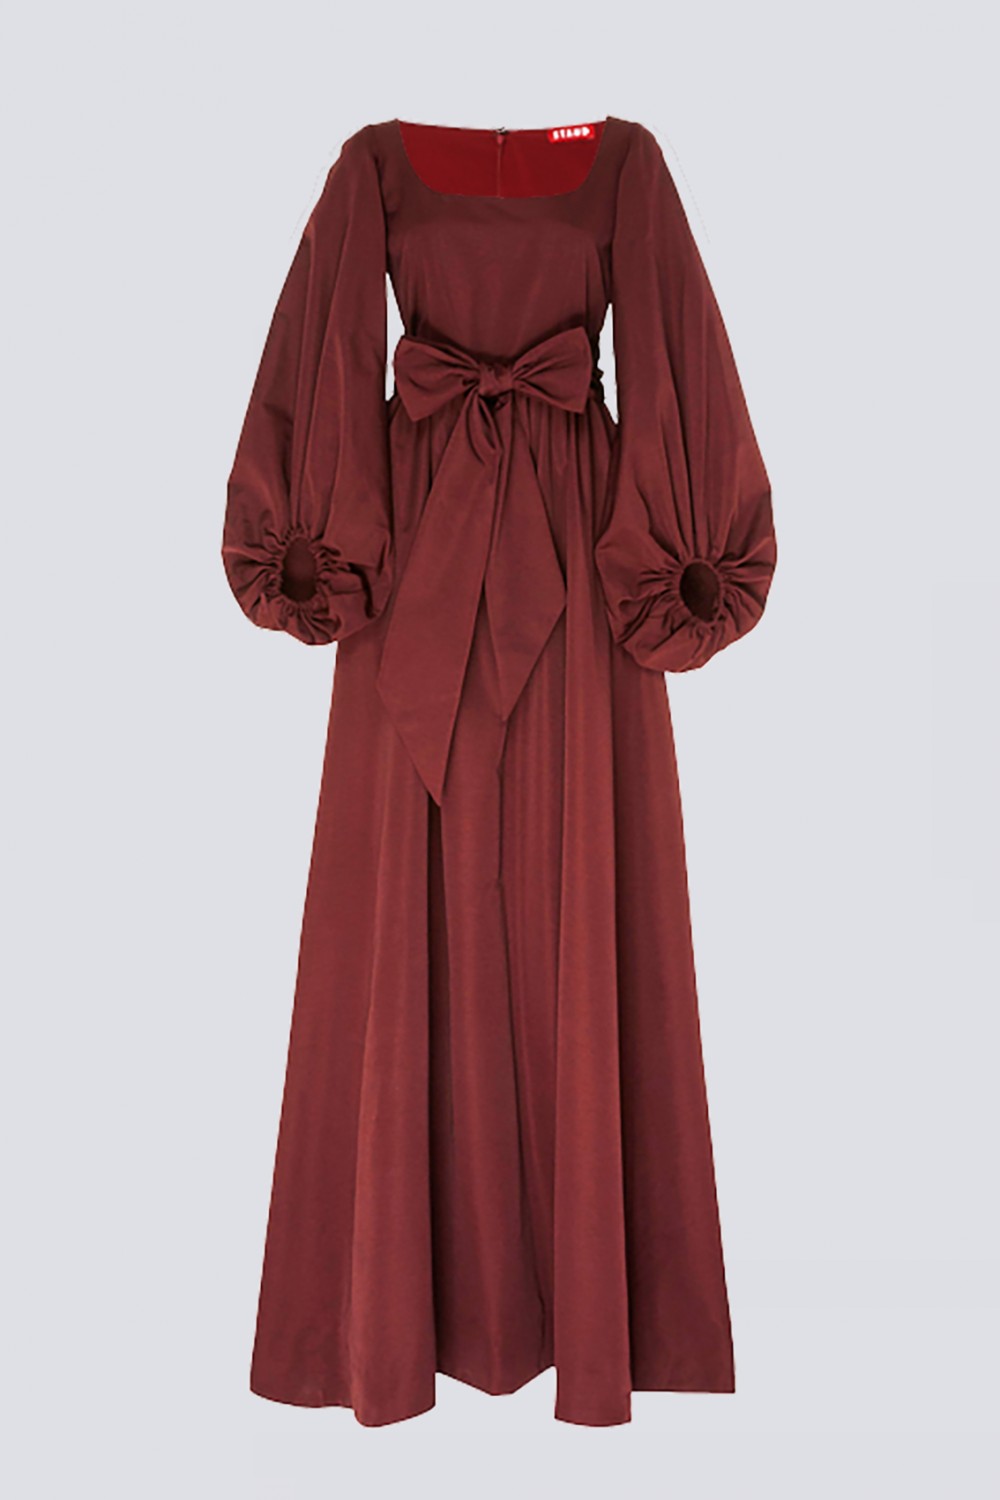 Long burgundy dress with bow